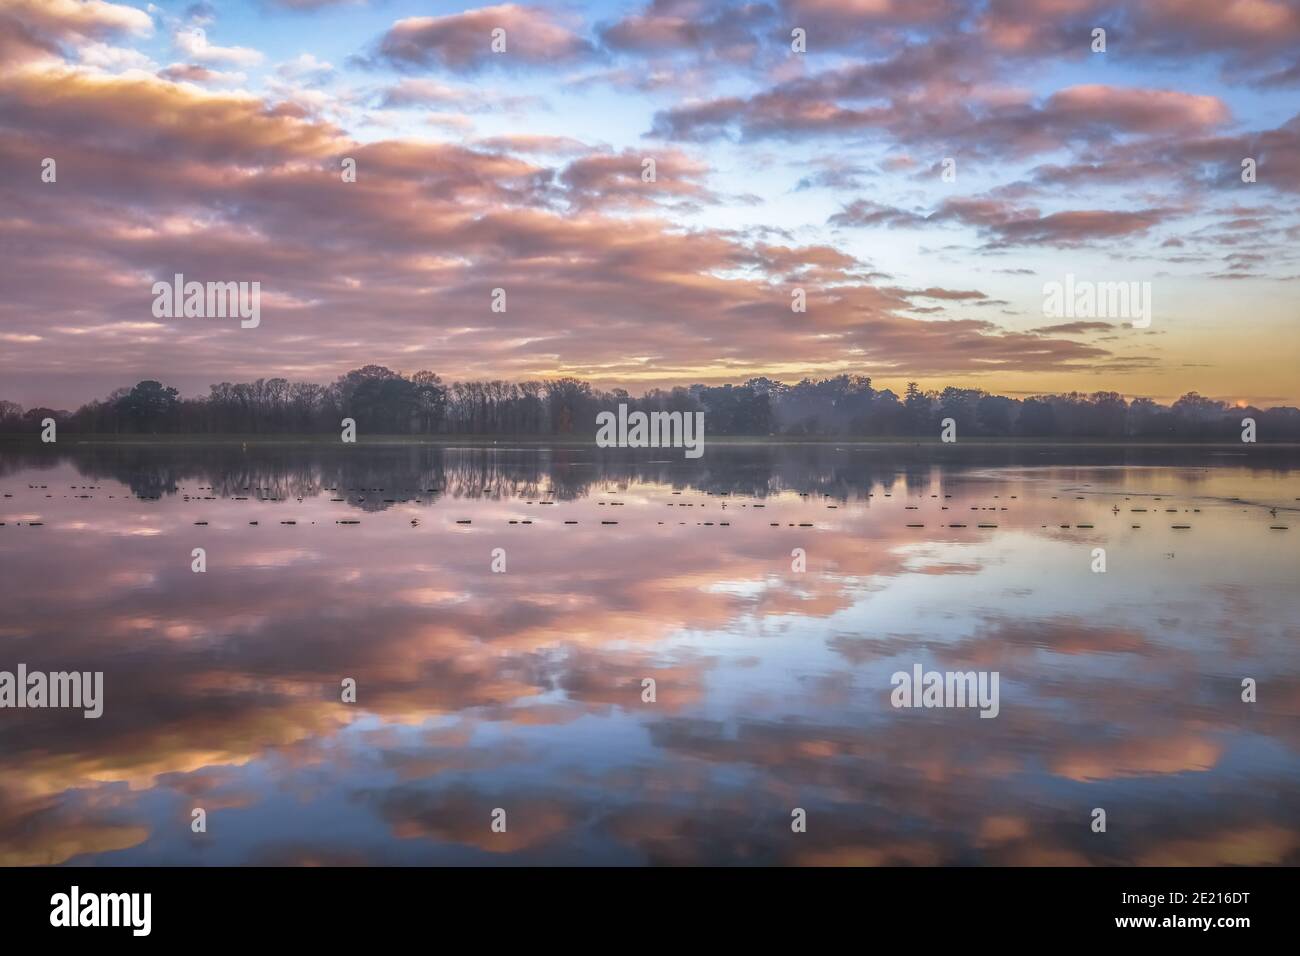 Beautiful natural reflection shots from the Warwickshire area of the UK Stock Photo